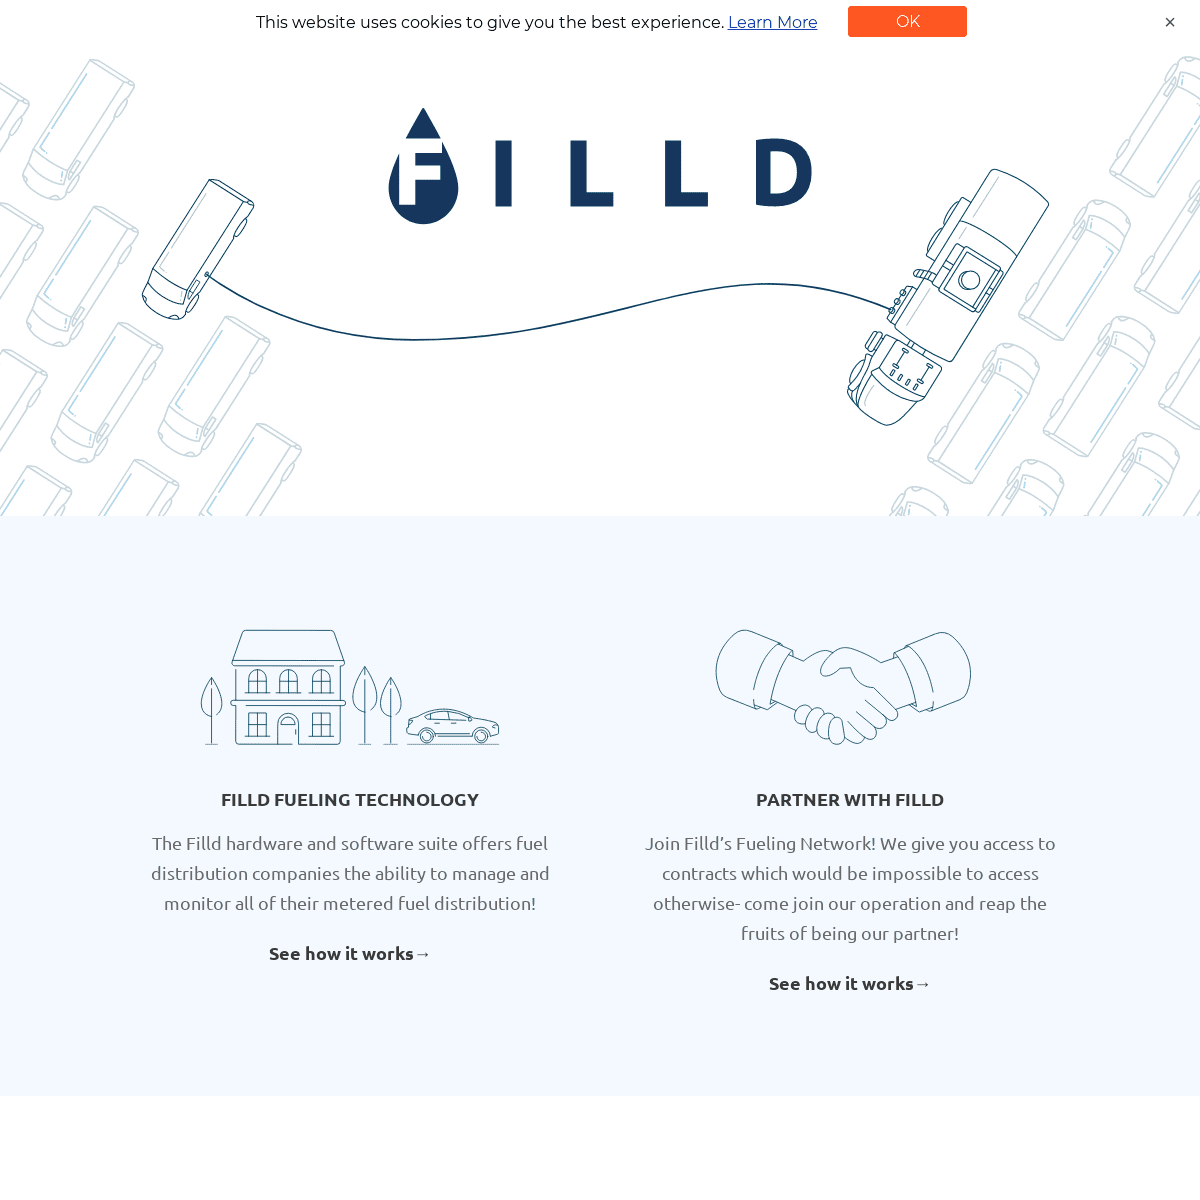 A complete backup of https://filld.com